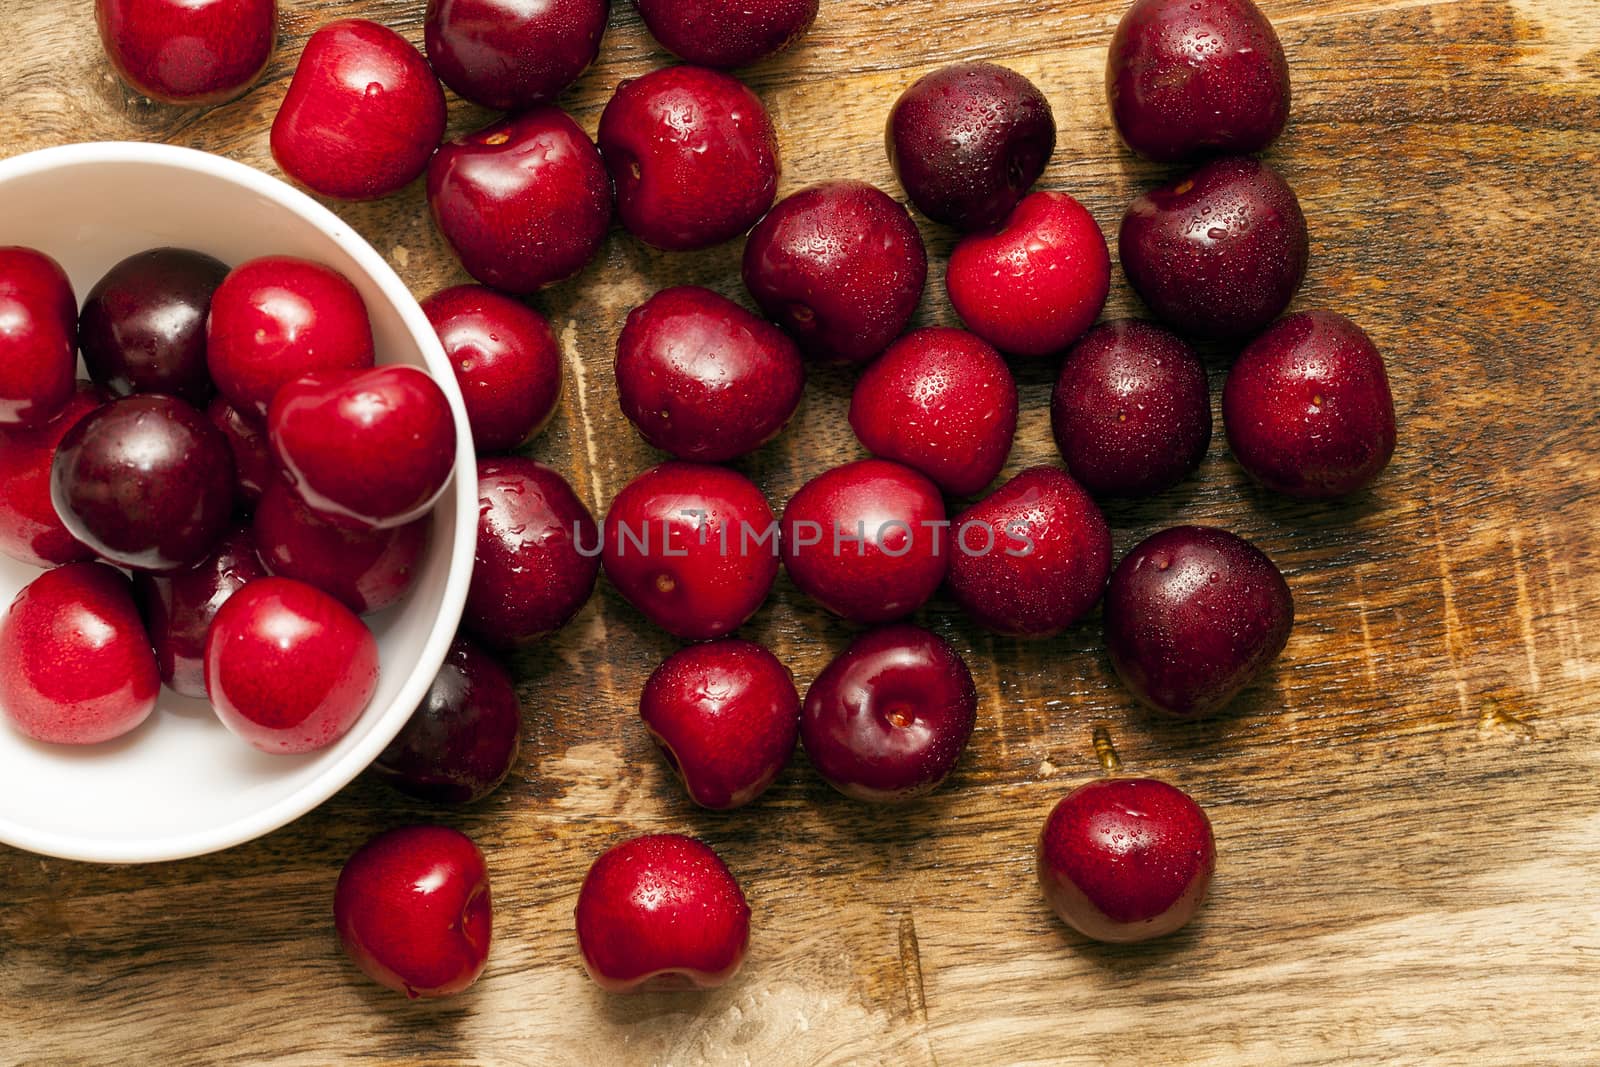 photographed close-up of ripe red cherries covered with water drops, shallow depth of field, photo taken from above. Berries on the table